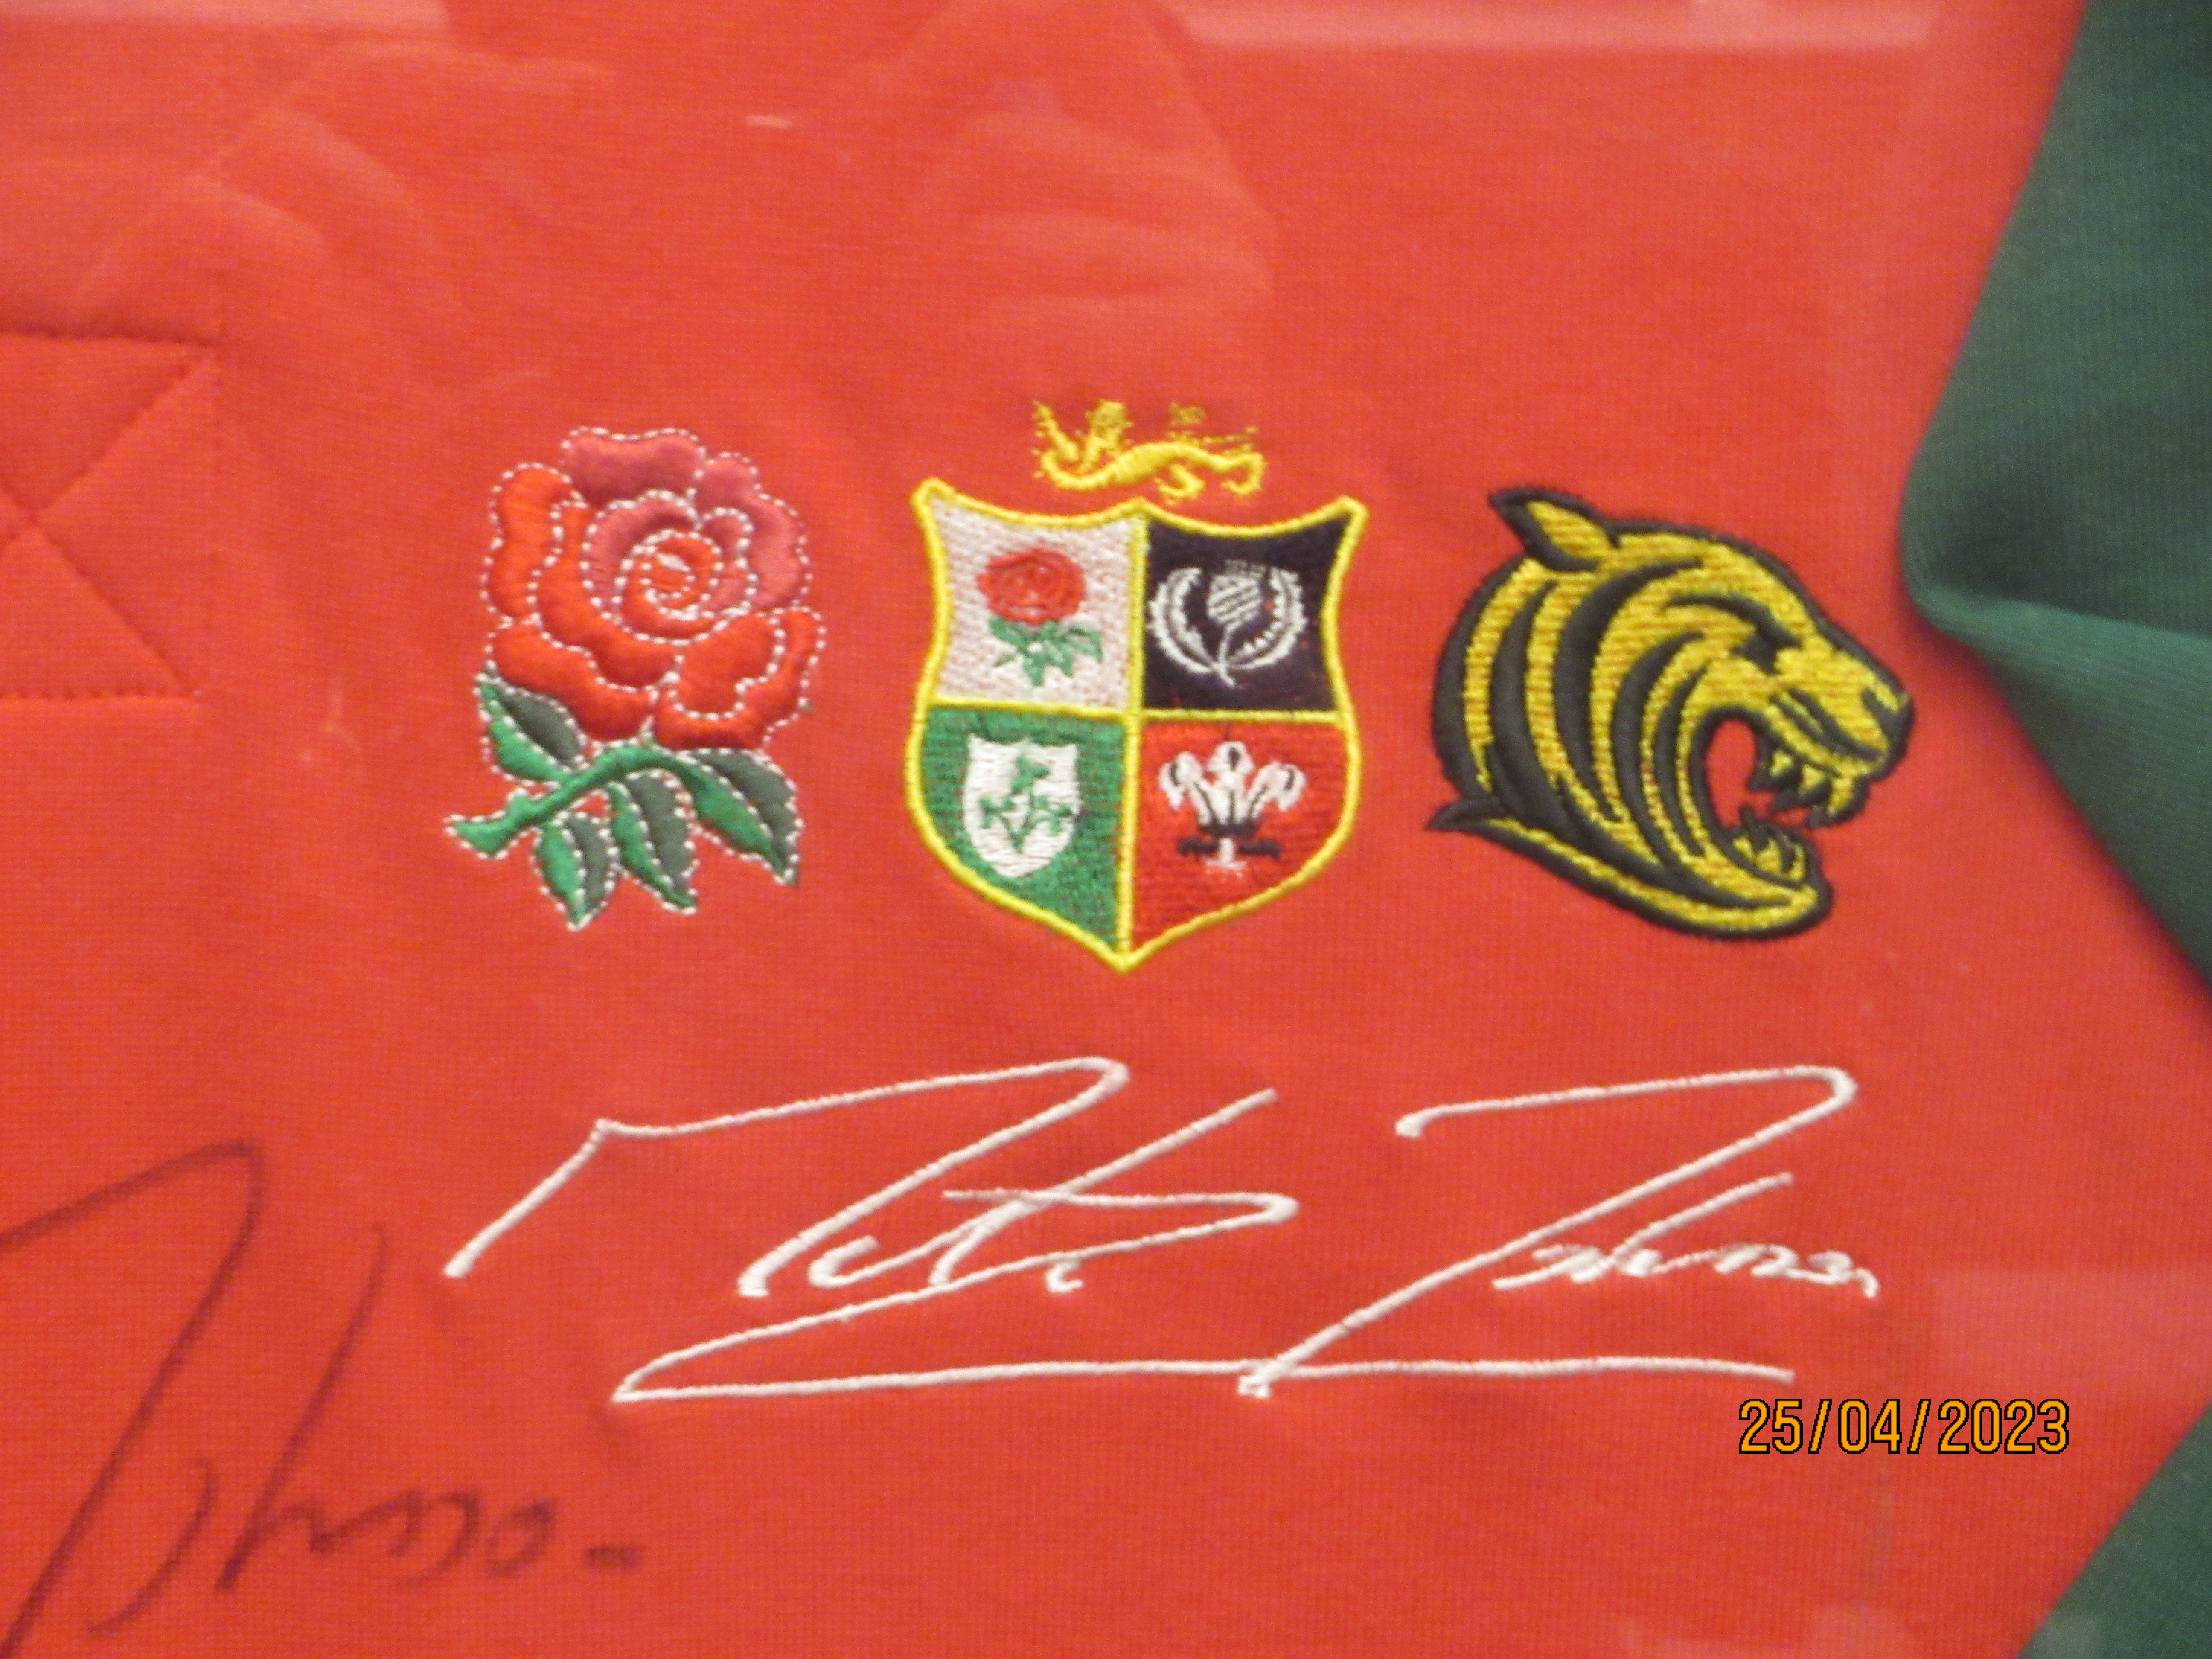 A Martin Johnson CBB Testimonial Year 2004/2005 Rugby Union shirt, bears embroidered emblems for - Image 3 of 5